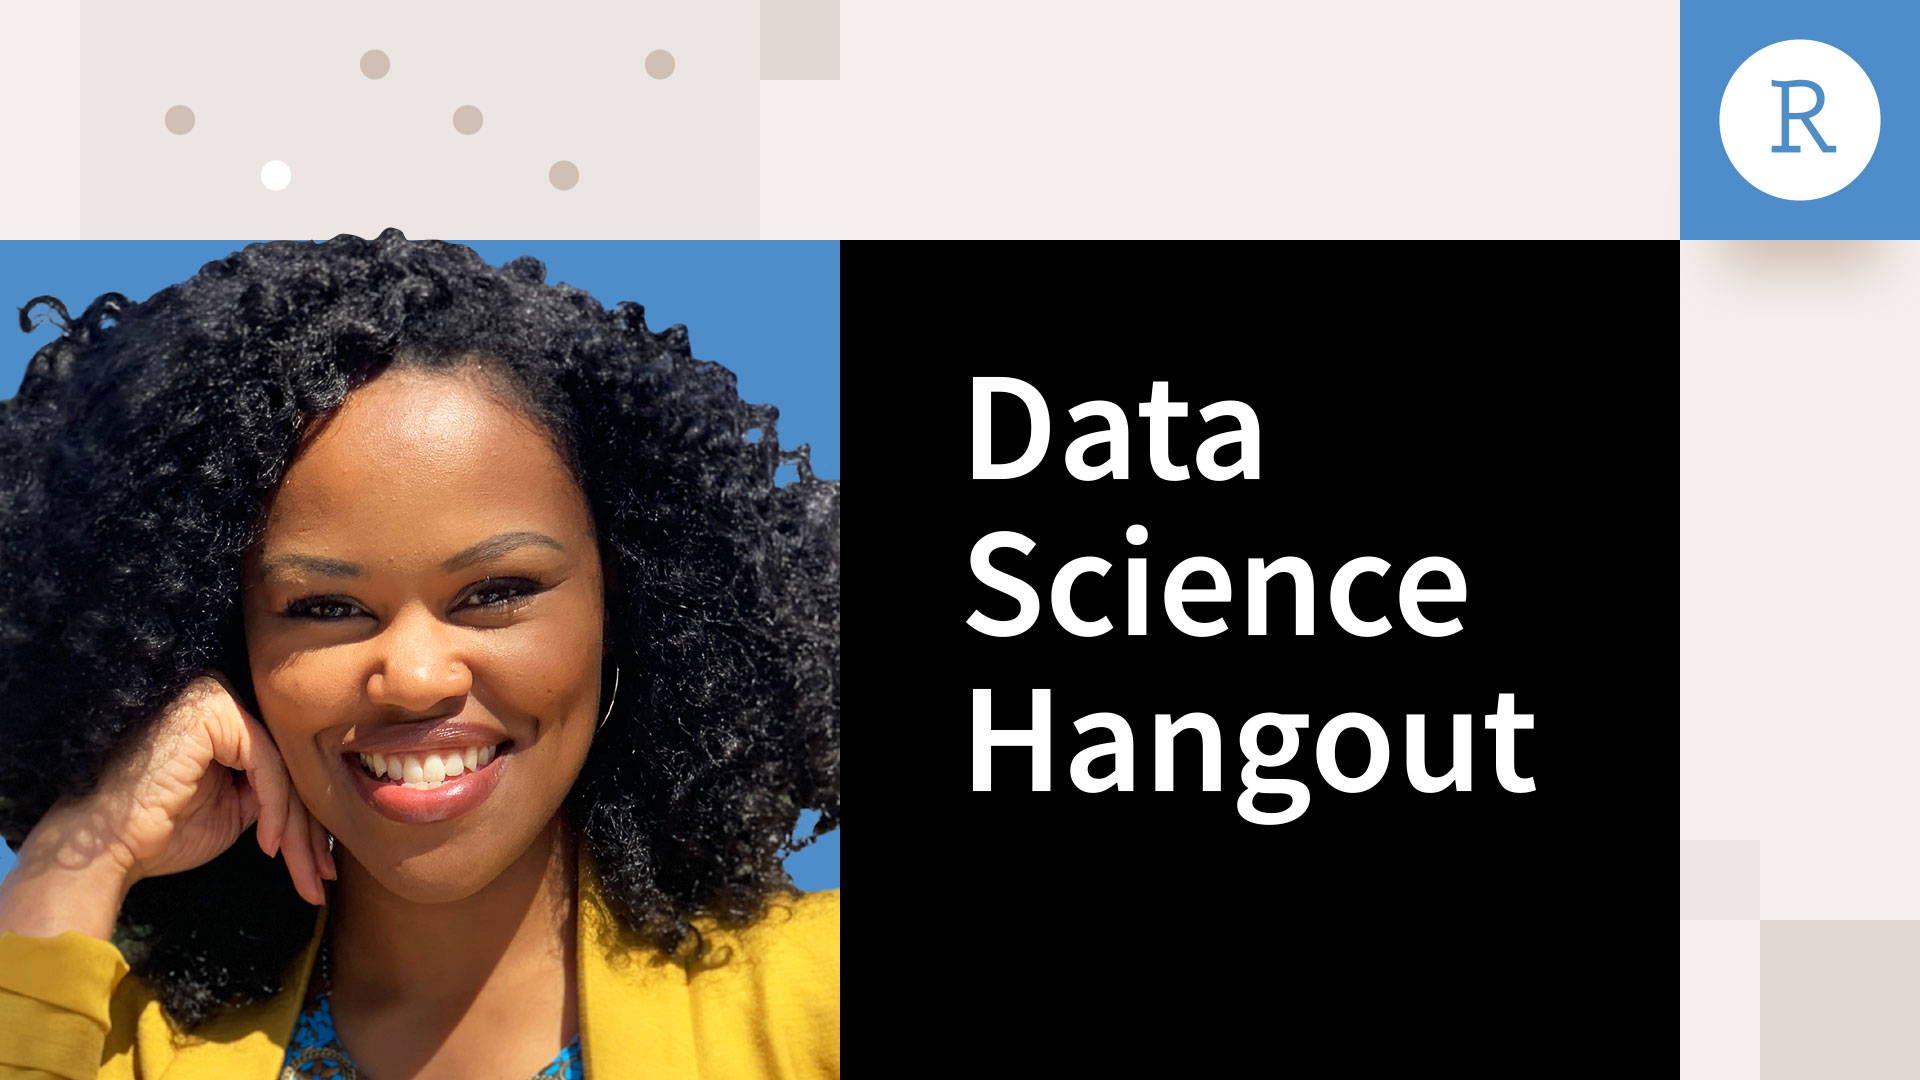 Data Science Hangout with Aliyah Wakil